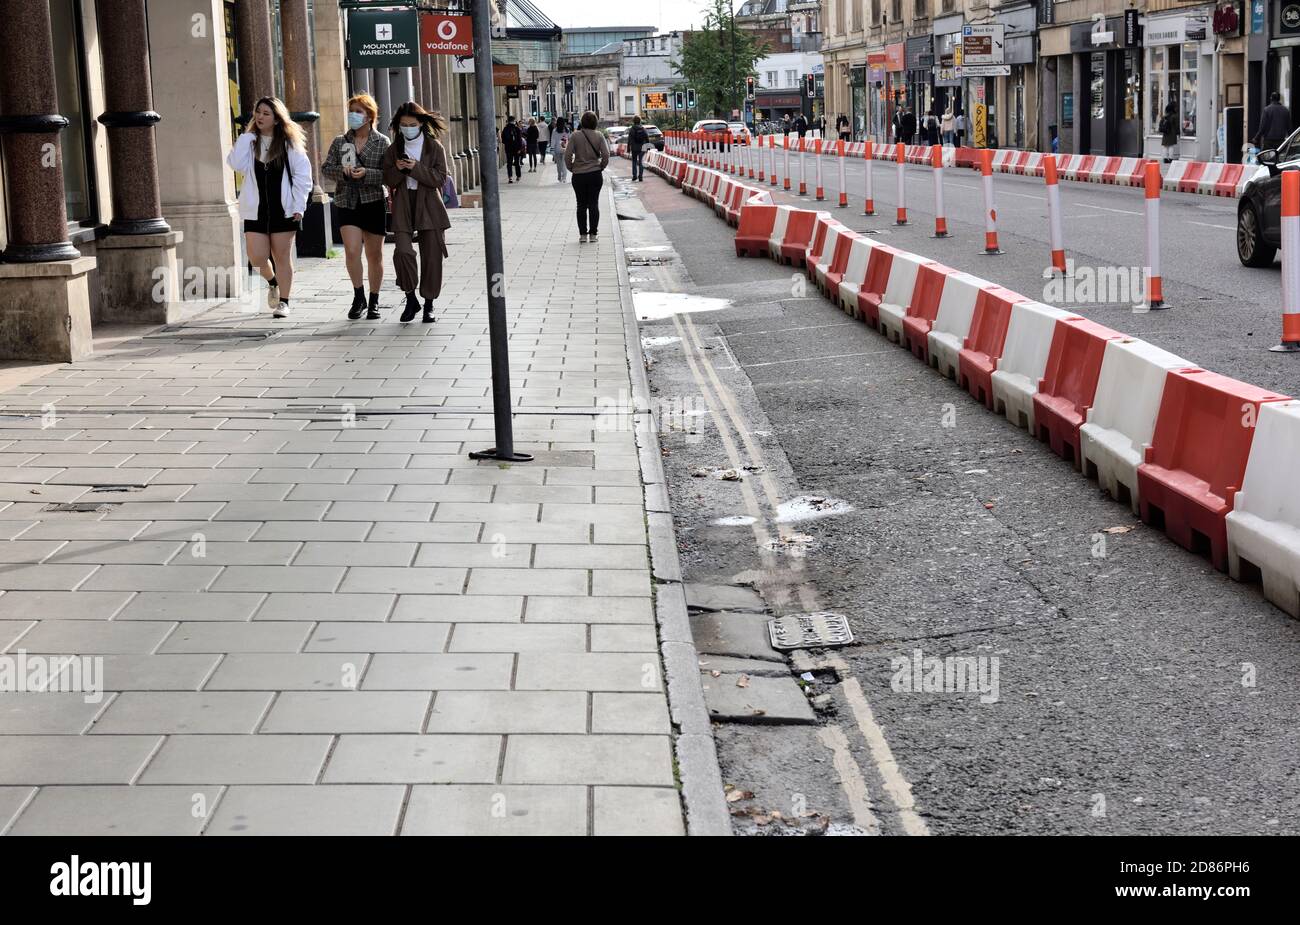 Pop up cycle lanes and pavement widening created to encourage bicycle travel due to covid, but causing traffic congestion, more pollution Bristol Quee Stock Photo